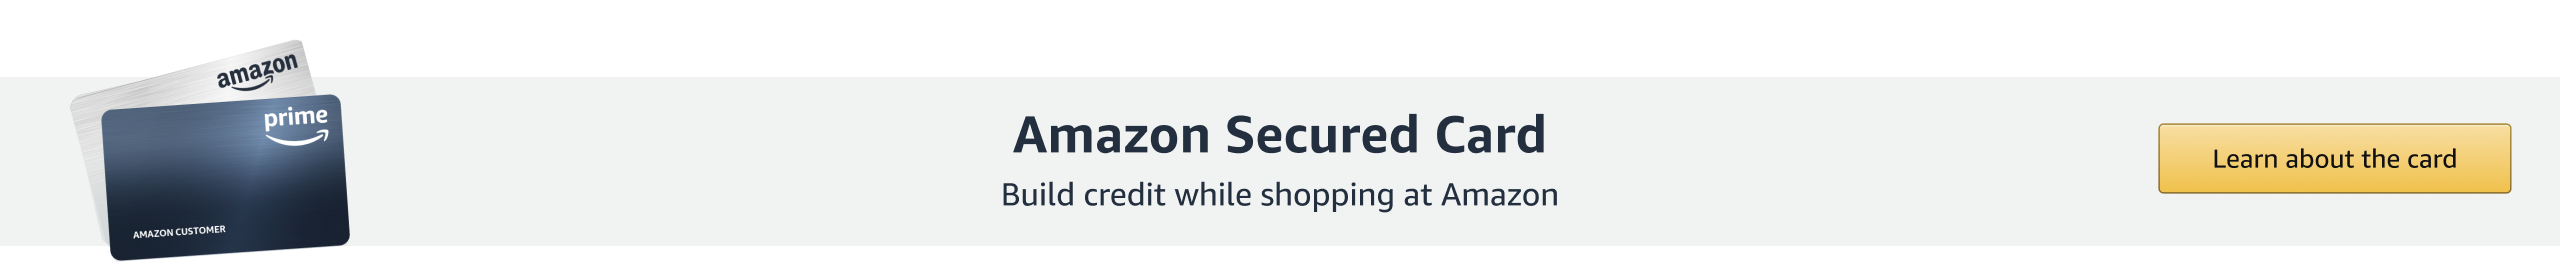 Amazon Secured Card. Build credit while shoping at Amazon. Learn about the card.